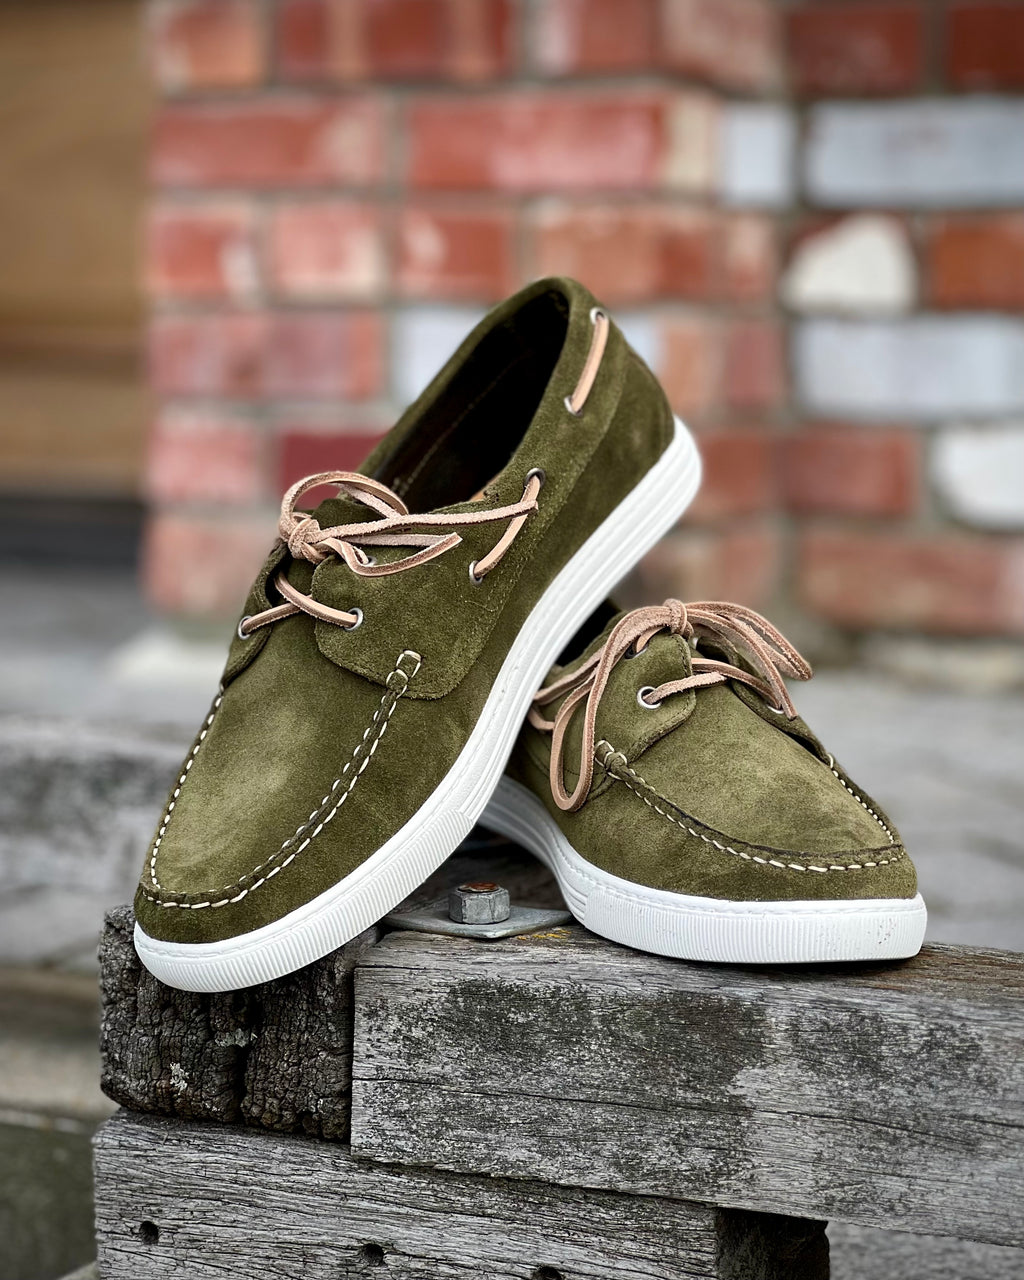 Suede Leather boat shoes by Italiano - Green suede shoes